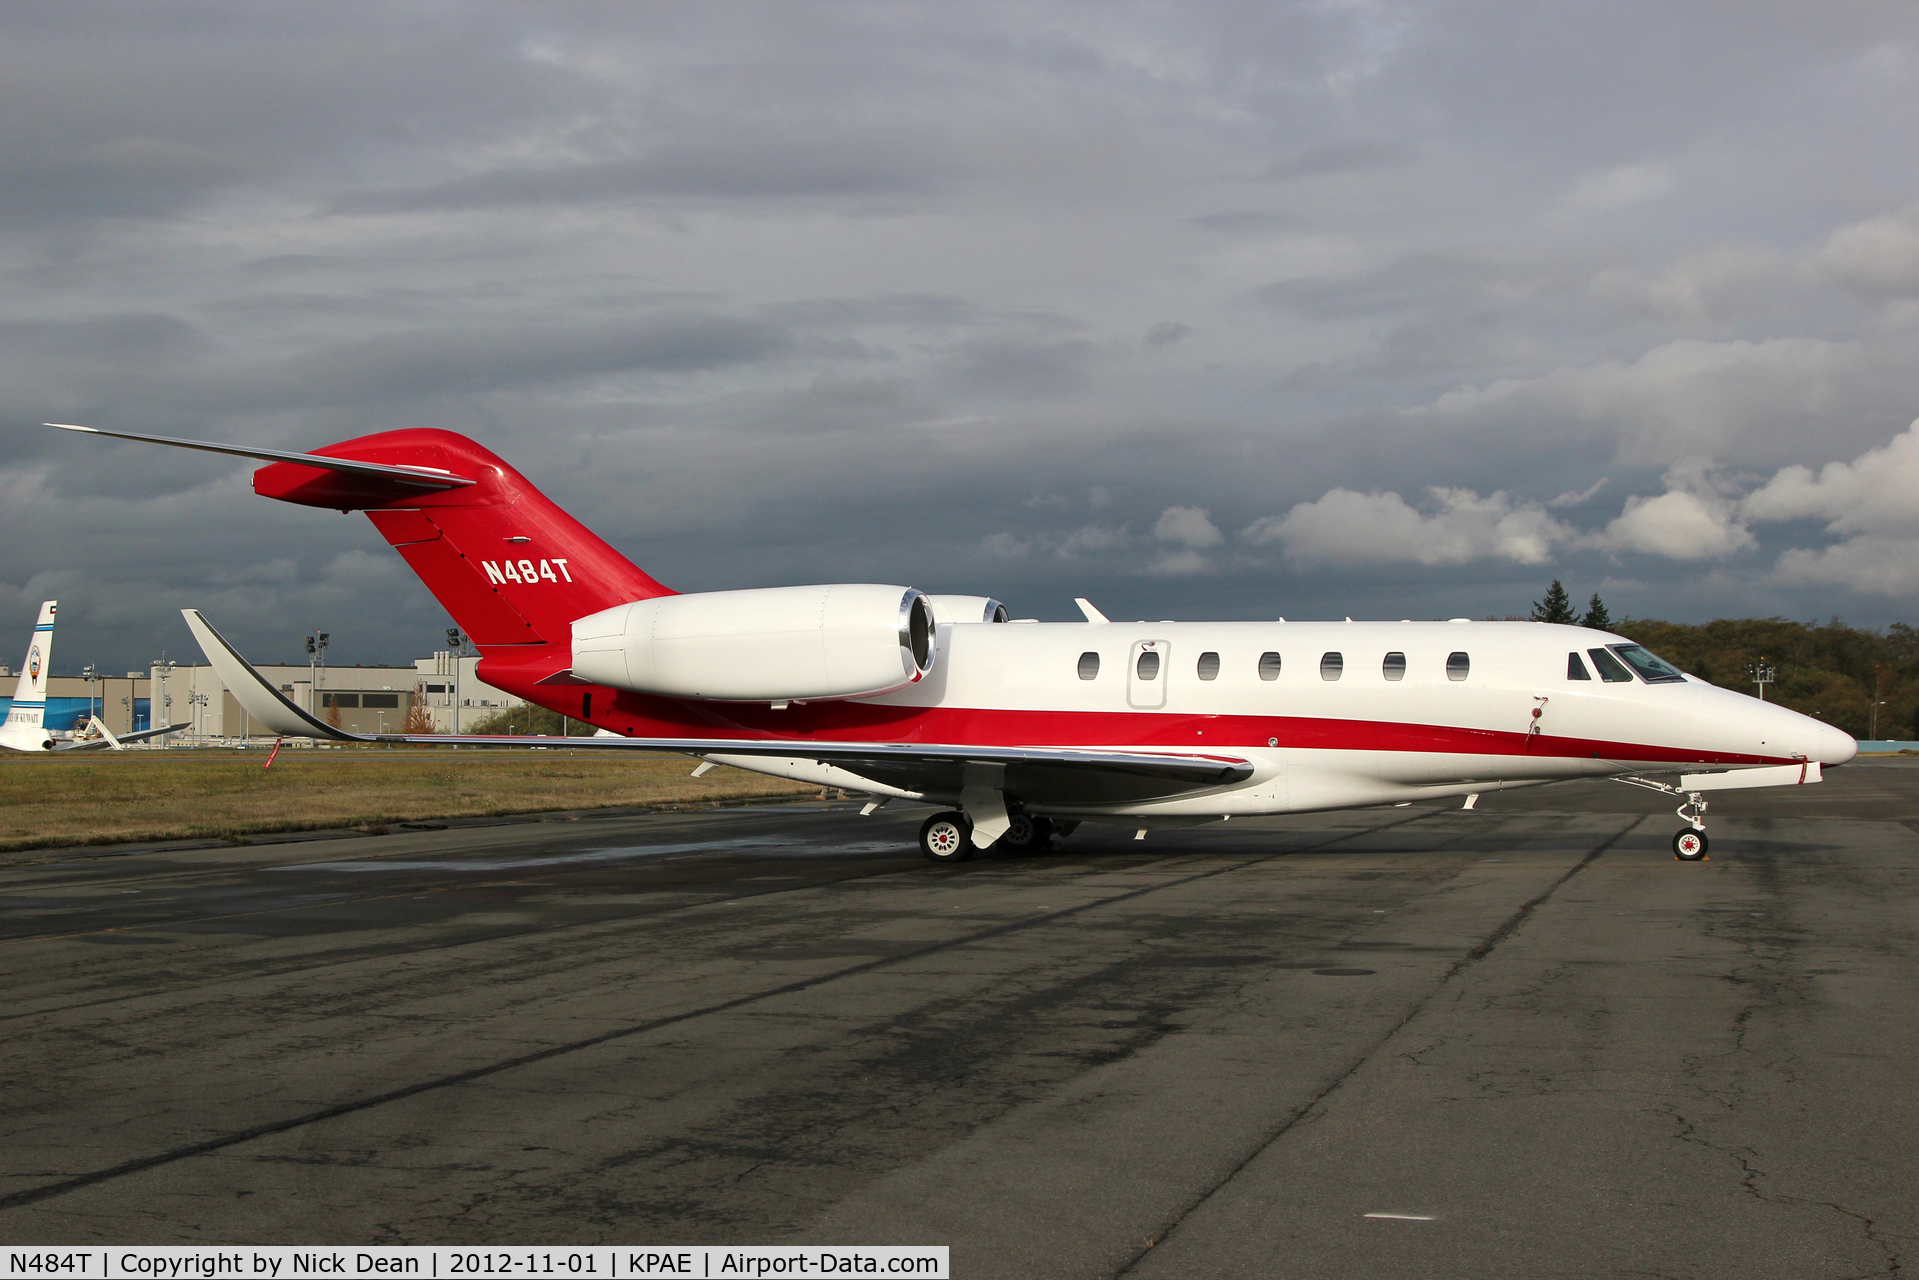 N484T, 2002 Cessna 750 Citation X C/N 750-0199, KPAE/PAE Target has removed the company logo from the tail they also removed the 